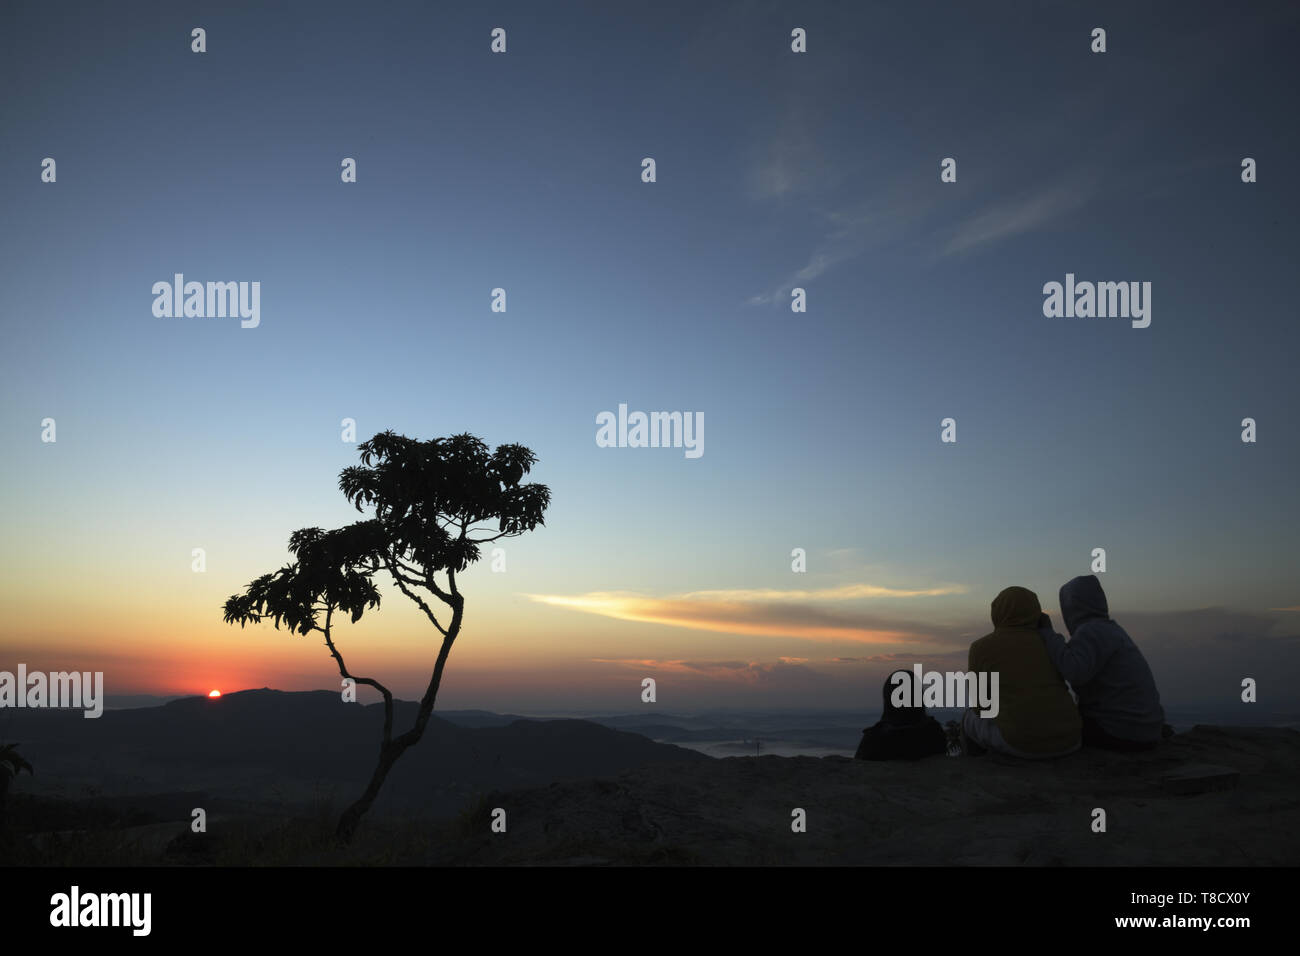 People silhouette at sunrise in Brazil Stock Photo